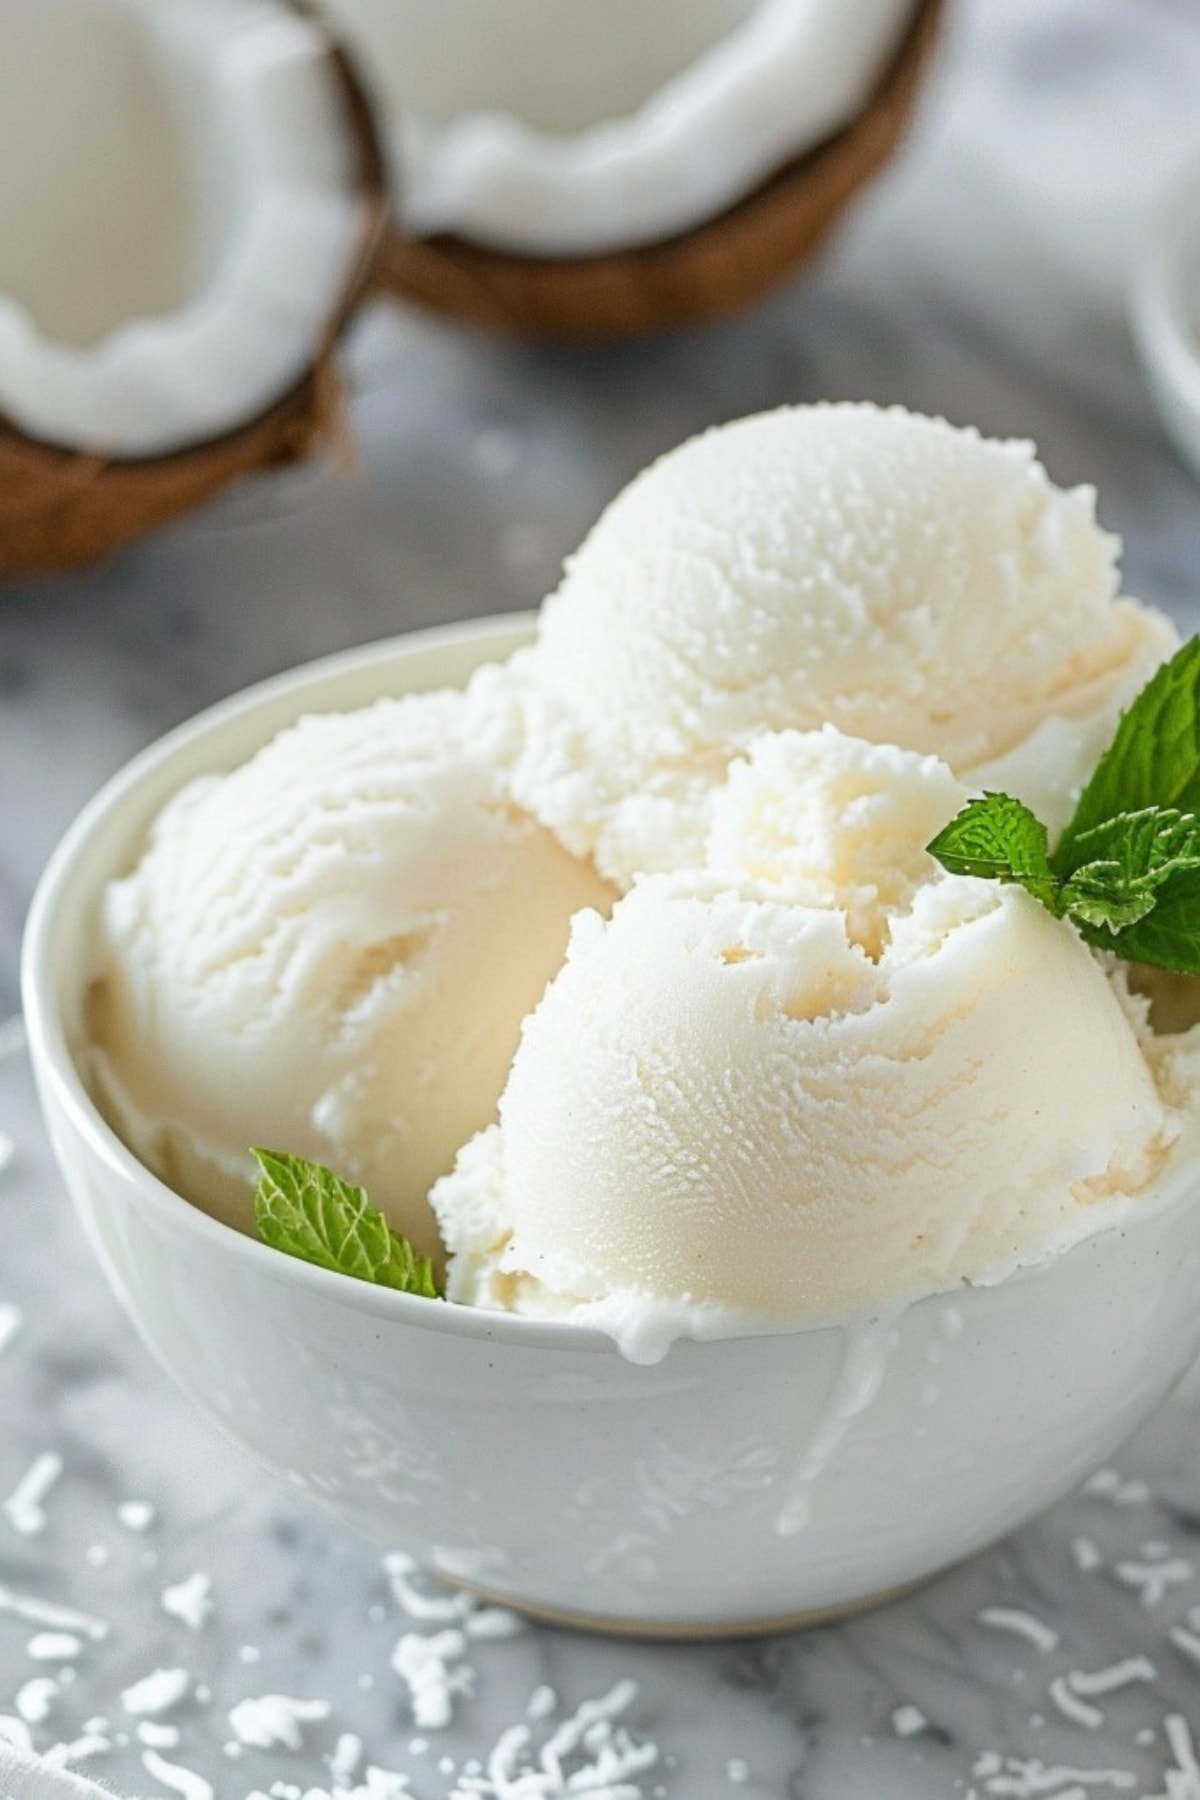 Coconut sorbet in a white bowl garnished with mint leaves.